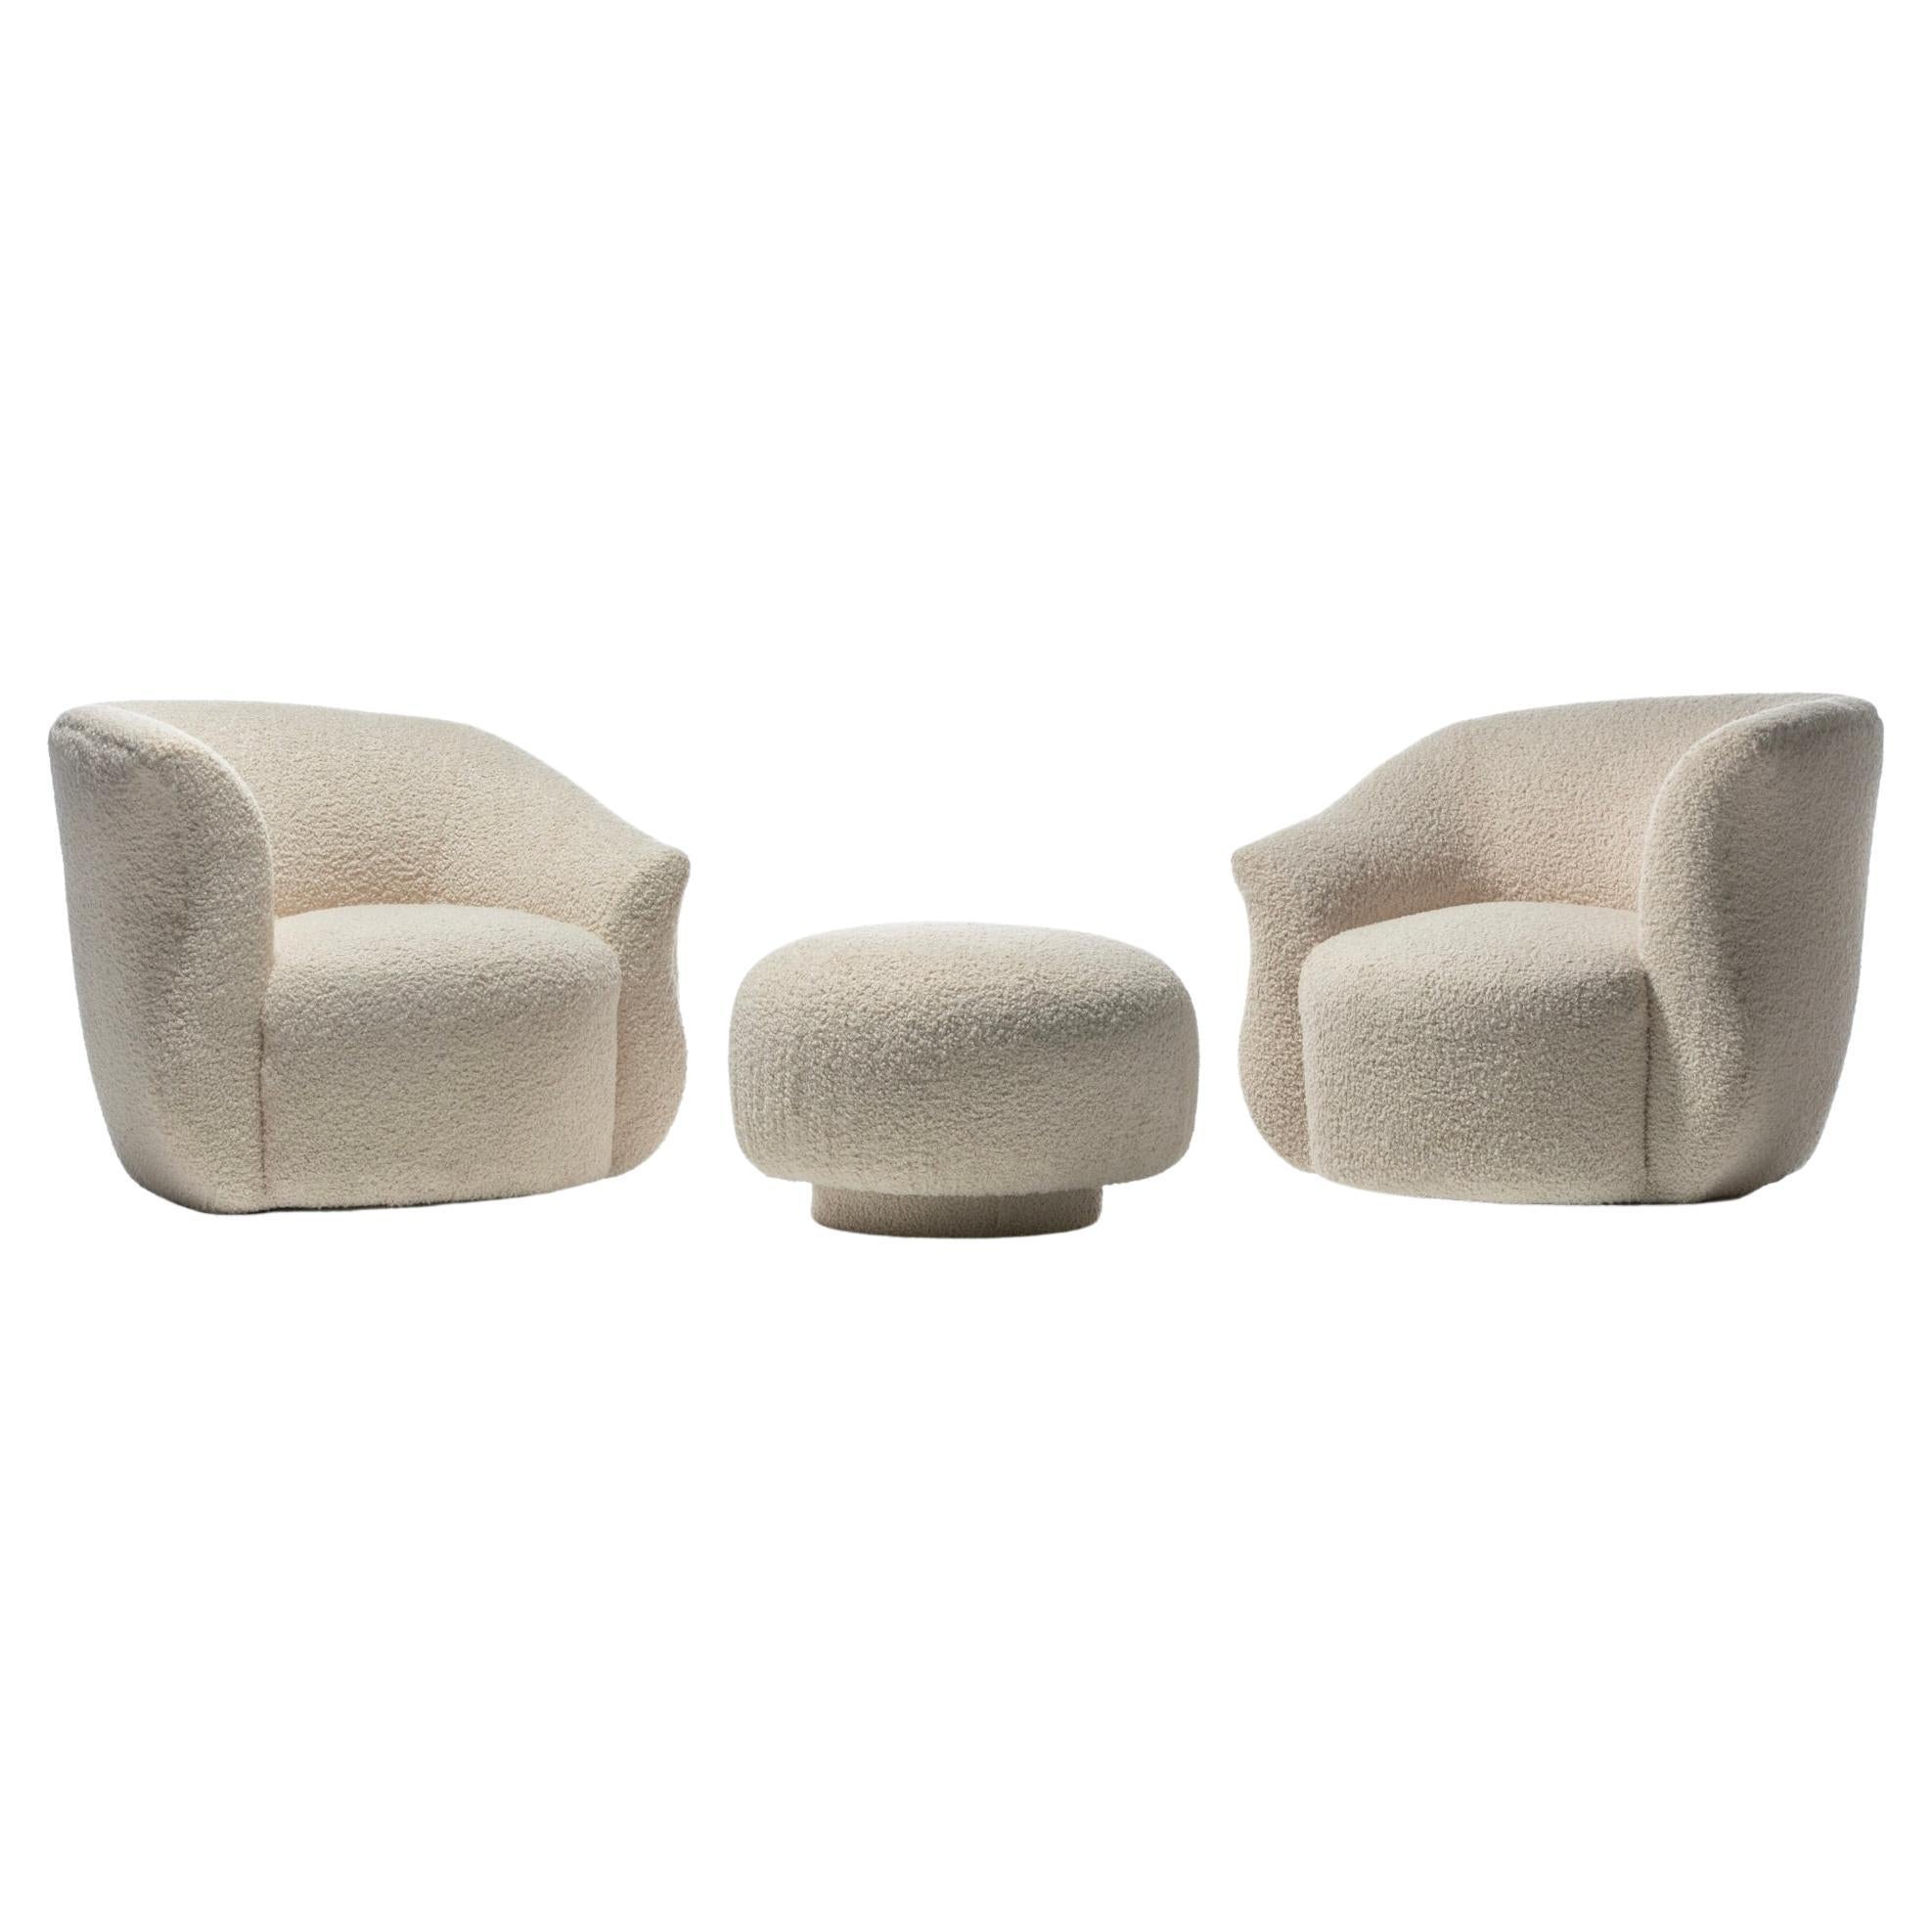 Pair of Post Modern Swivel Chairs & Swivel Top Ottoman in Ivory White Bouclé